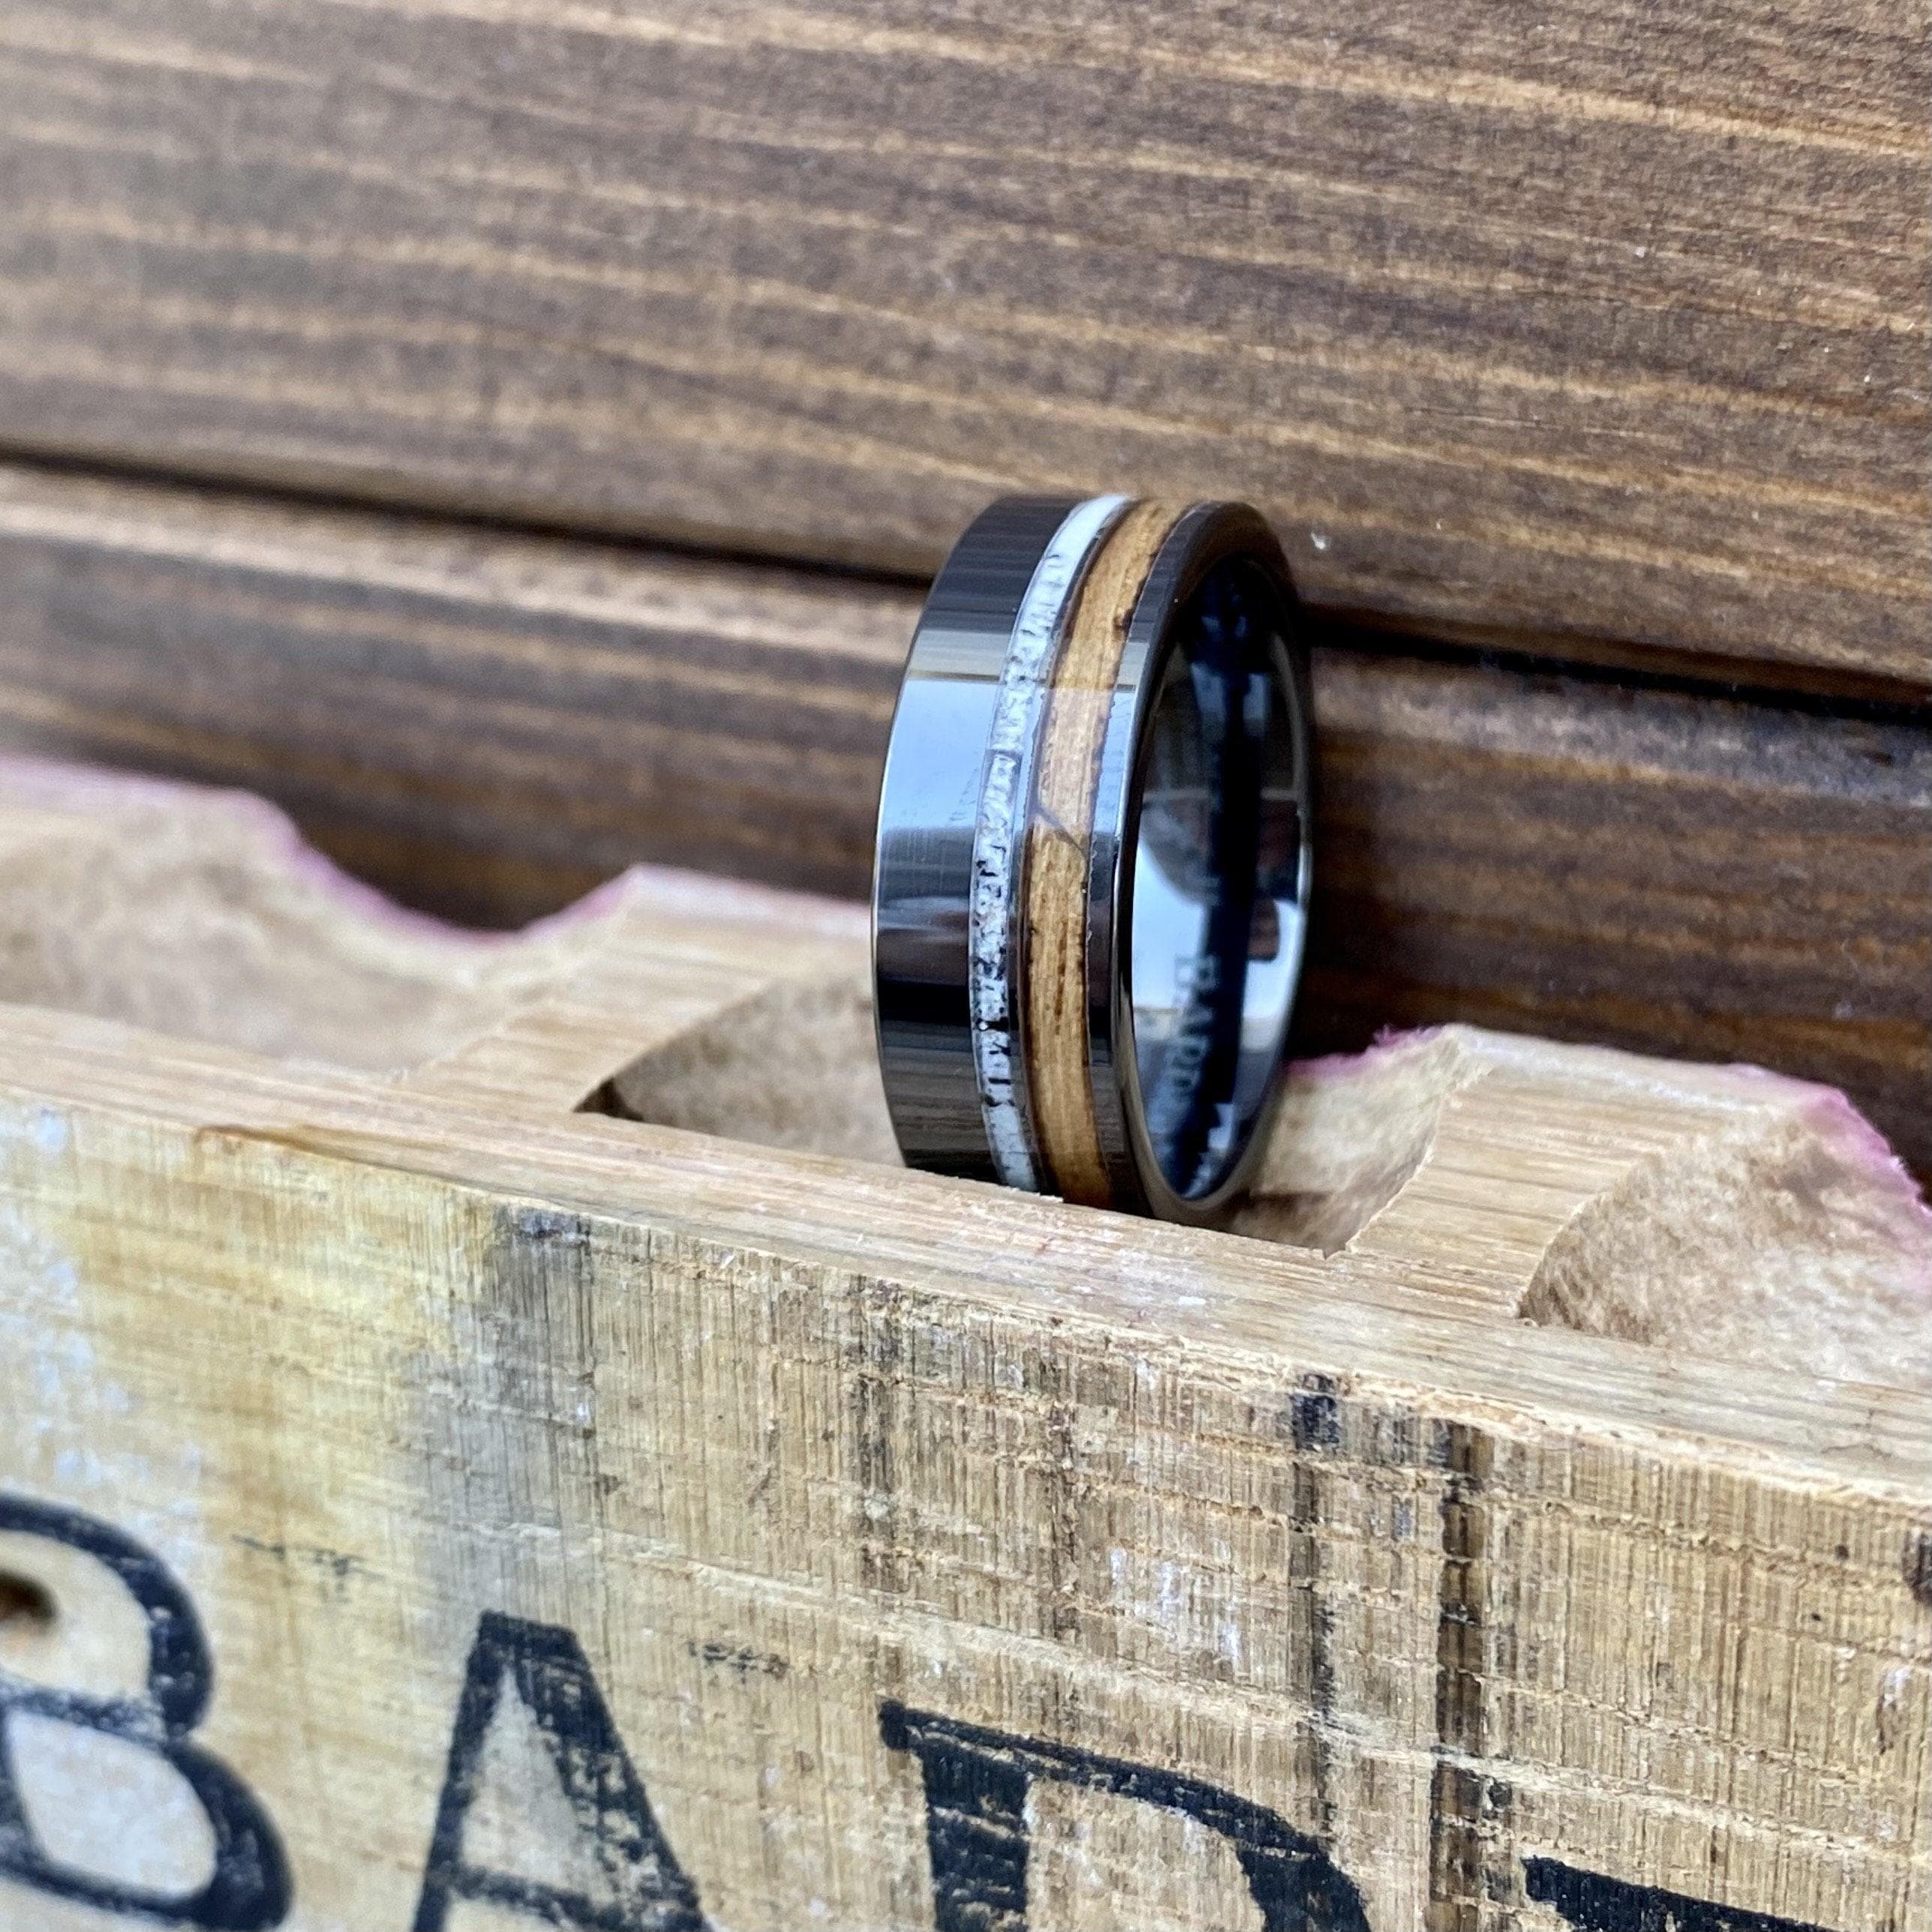 Barrel Aged ALT Wedding Band "The Huntsman" 100% USA Made Build Your Own Ring Black Diamond Ceramic Pipe Cut Band with Off-Center Wood Inlay, And Antler Inlay